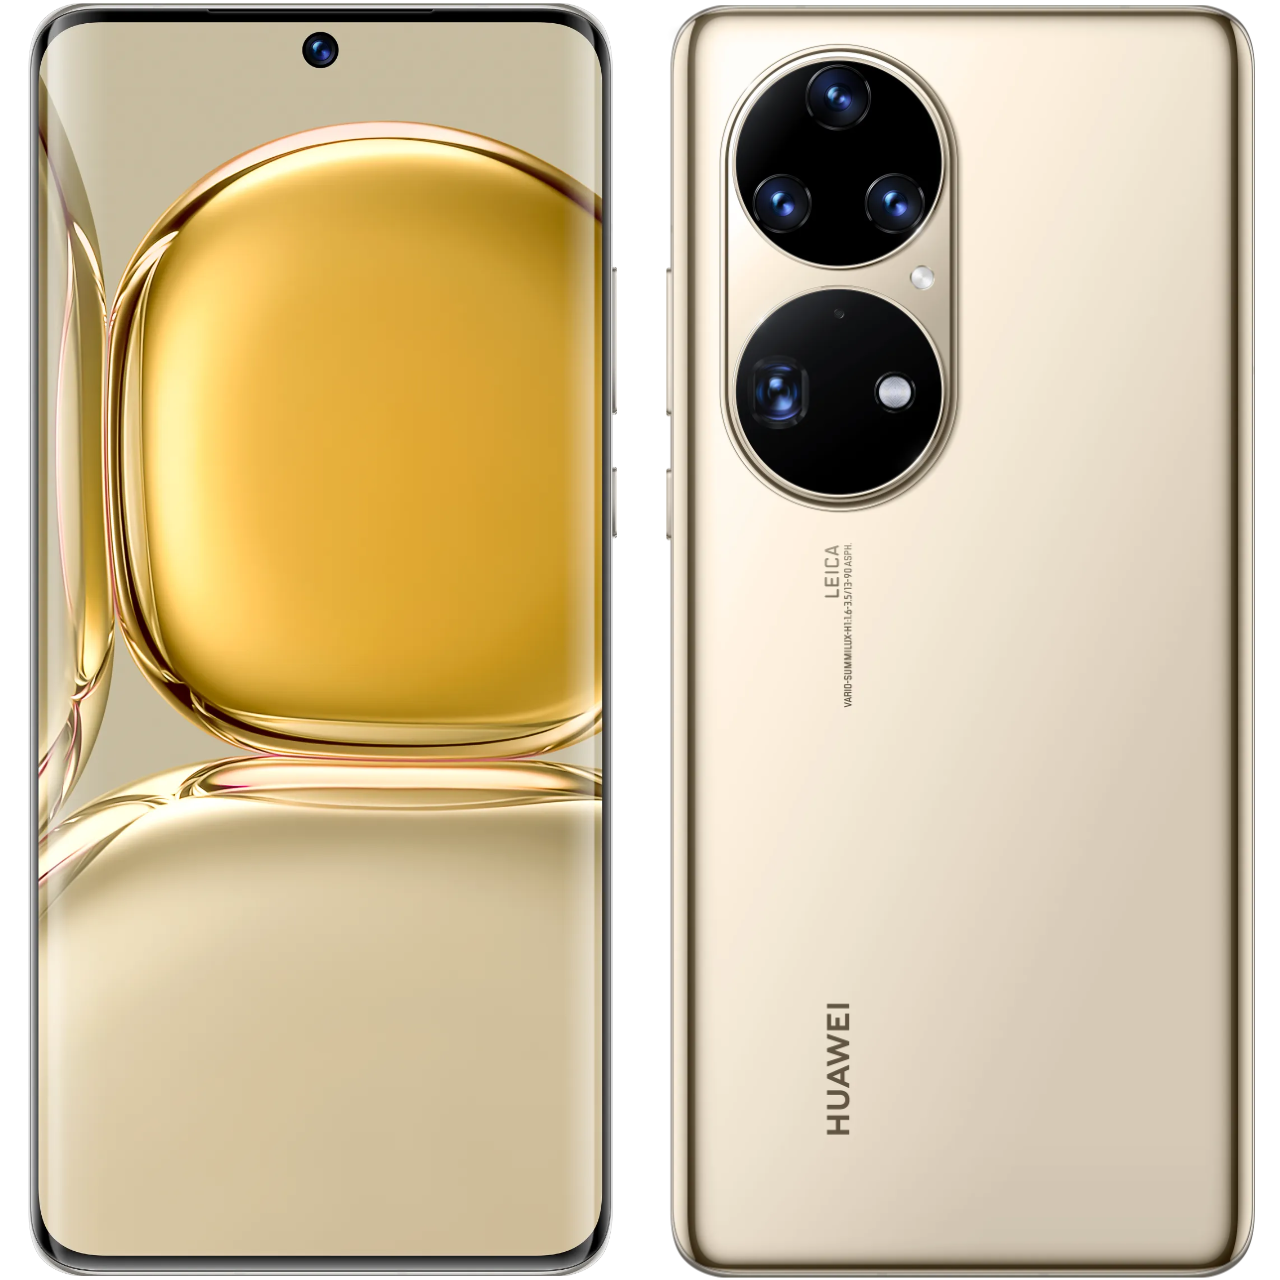 https://images.frandroid.com/wp-content/uploads/2021/08/huawei-p50-pro-frandroid-2021.png